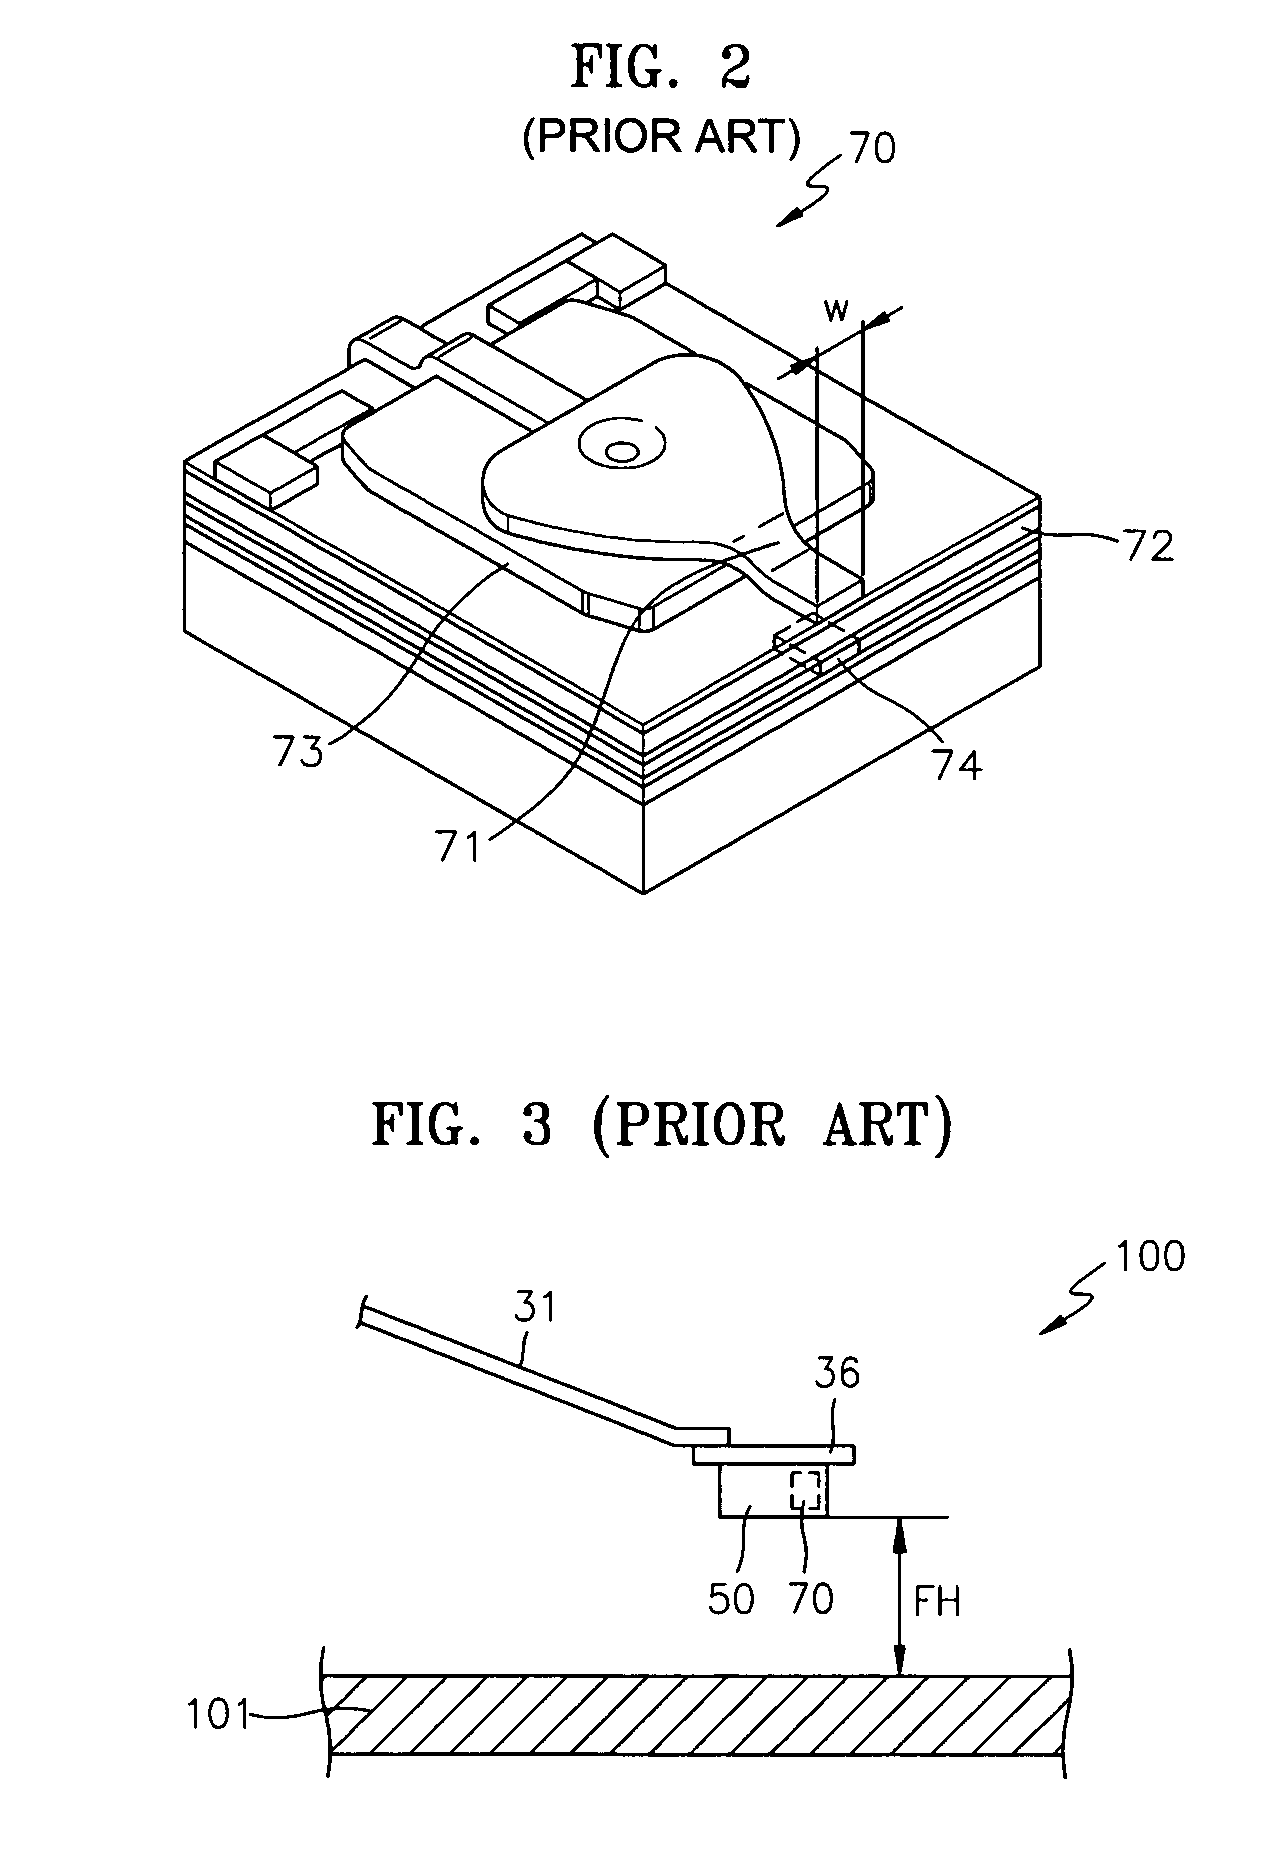 Methods of measuring TPTP of magnetic head and controlling recording current